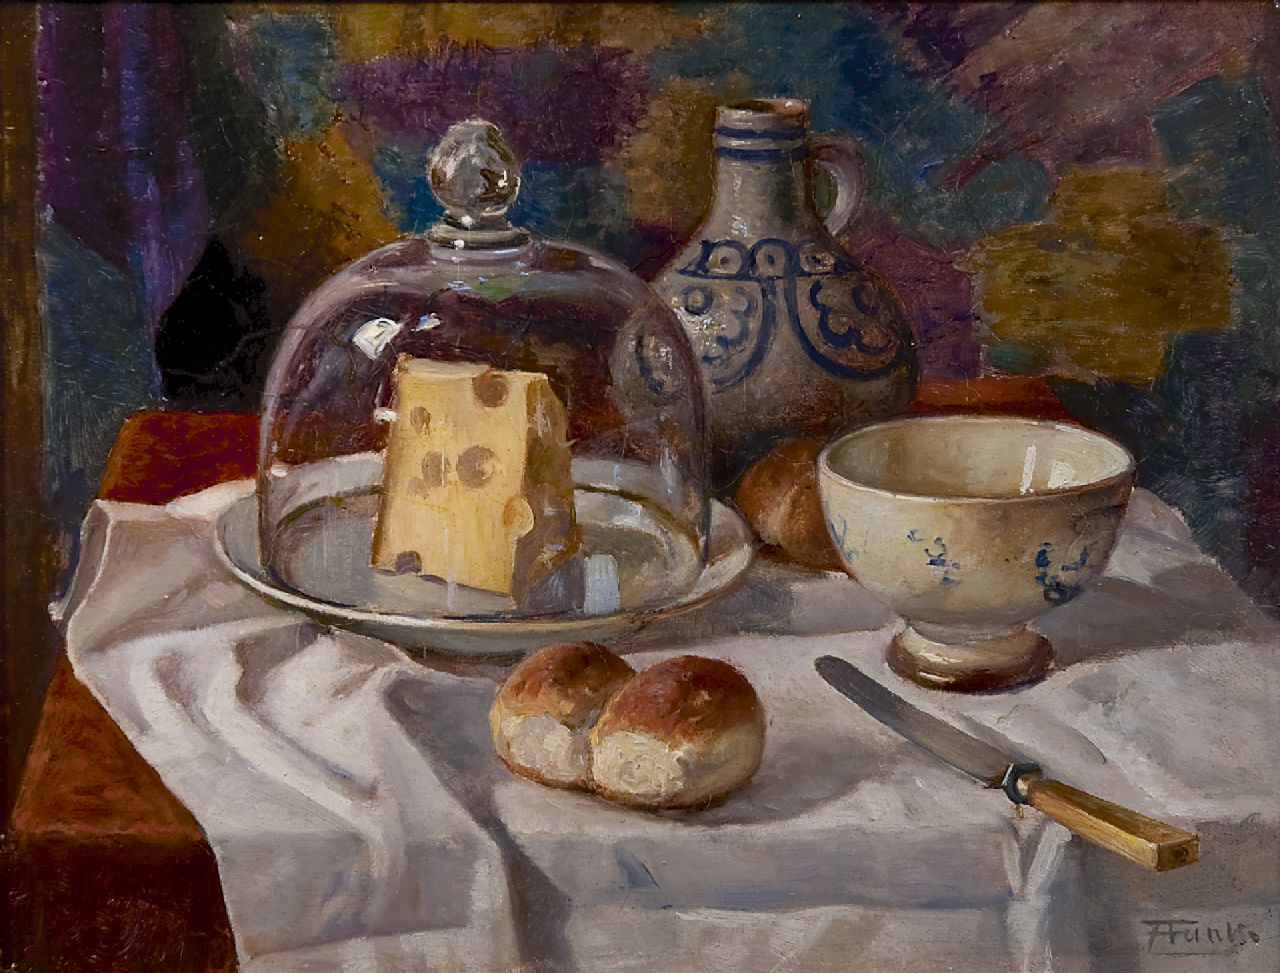 Anton Funke | A still life with a cheese cover, a bowl and rolls, oil on paper laid down on panel, 18.6 x 24.3 cm, signed l.r.